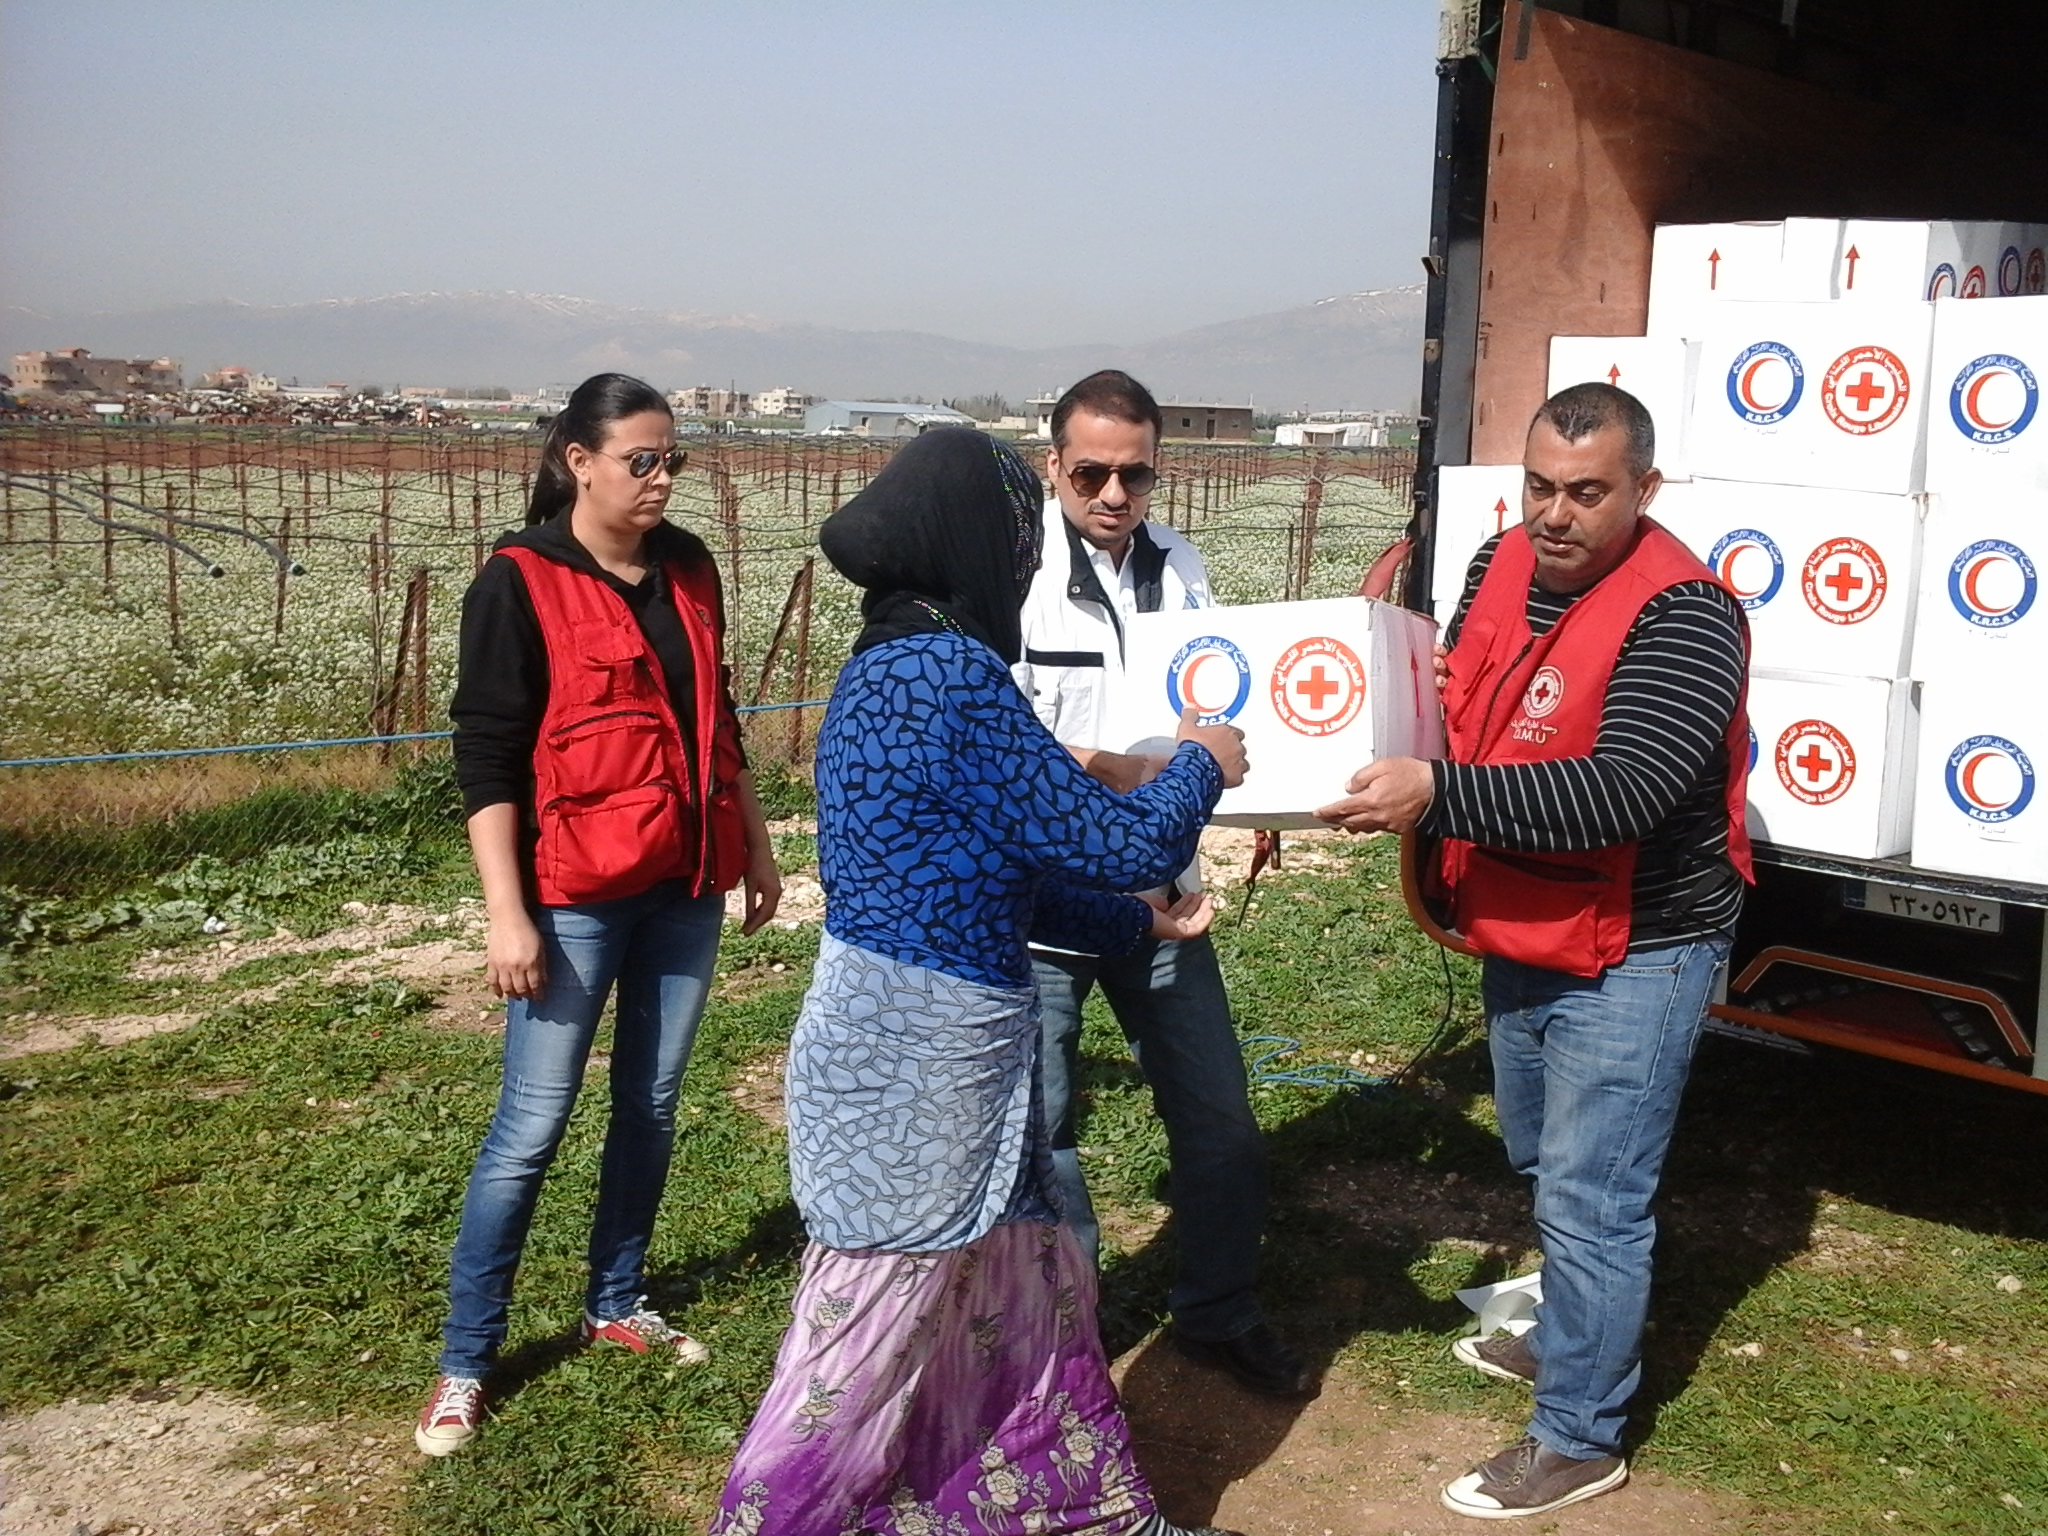 KRCS hands out relief aid to 5,000 Syrian families in Lebanon